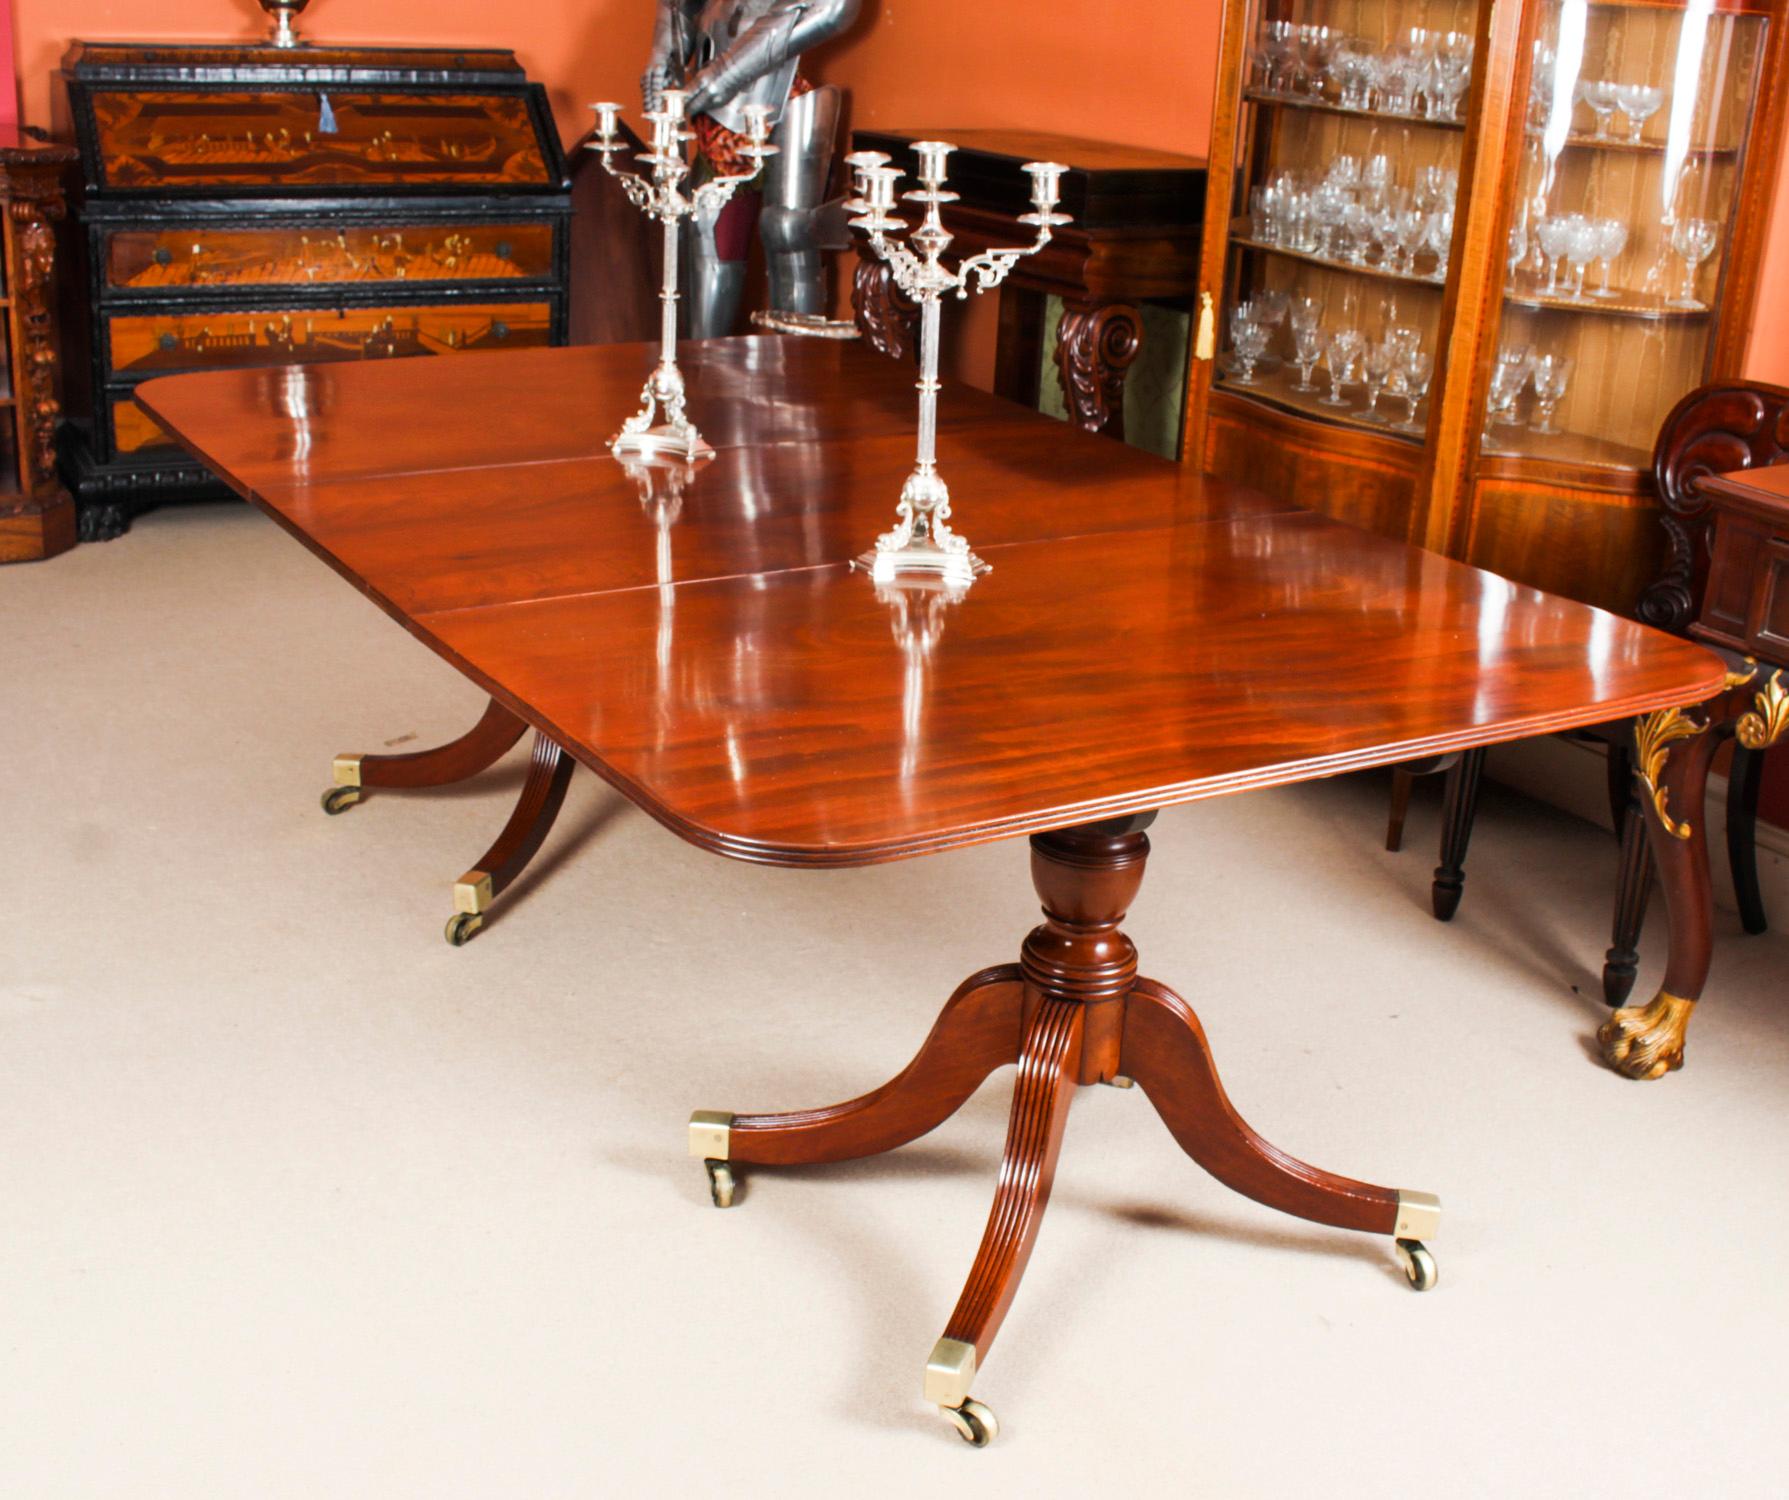 This is an elegant antique Regency Period Mahogany dining table, Circa 1820 in date.
 
The table is of rectangular form with rounded corners and reeded edge. It is raised on twin baluster column supports with four reeded legs ending in brass caps